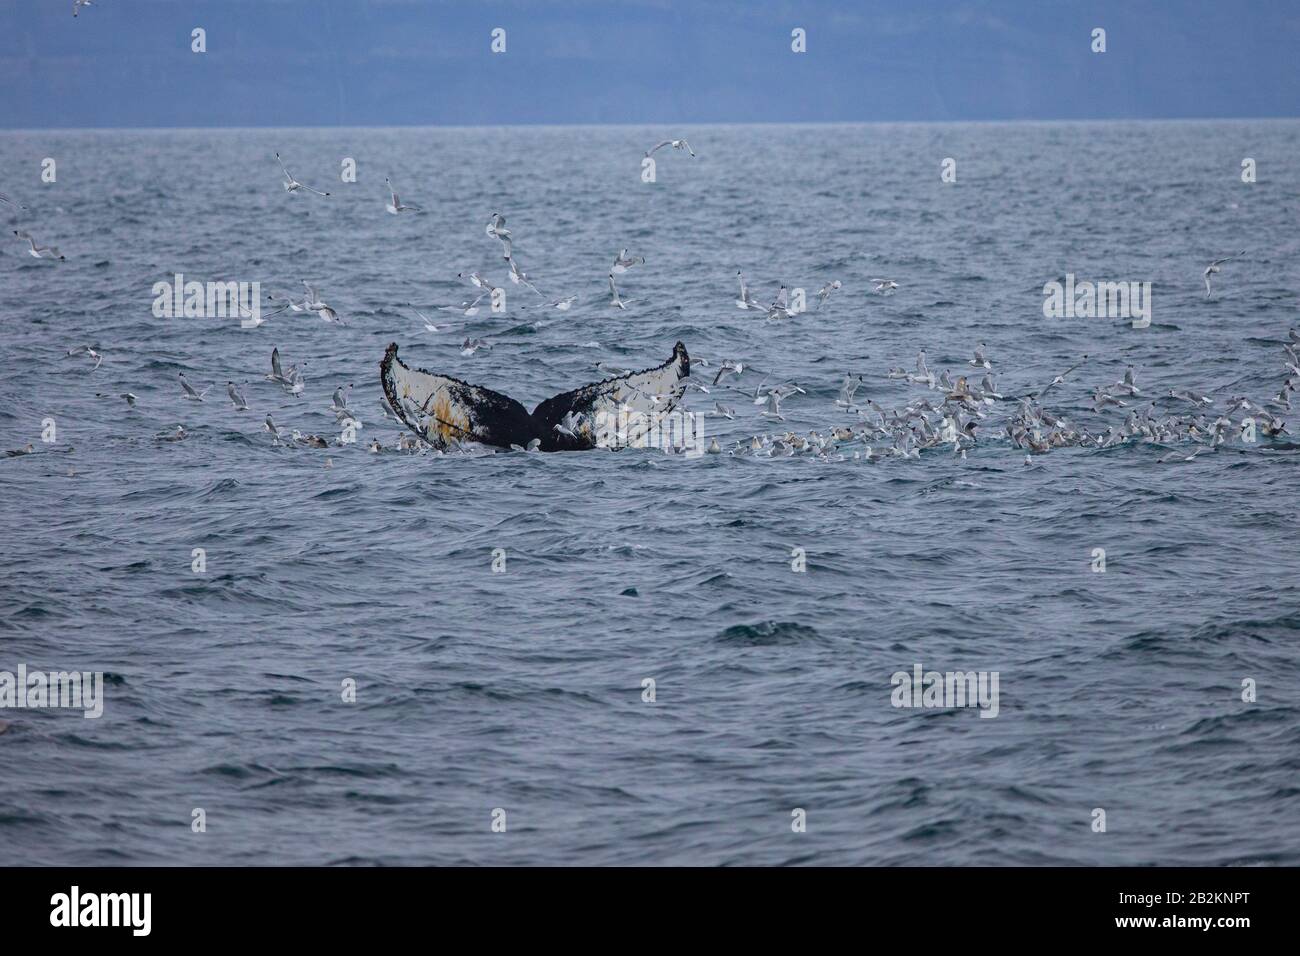 Humpback-whale from the north, Spitsbergen, Norway. Marine mammals from the arctic, traveling around the world. Stock Photo